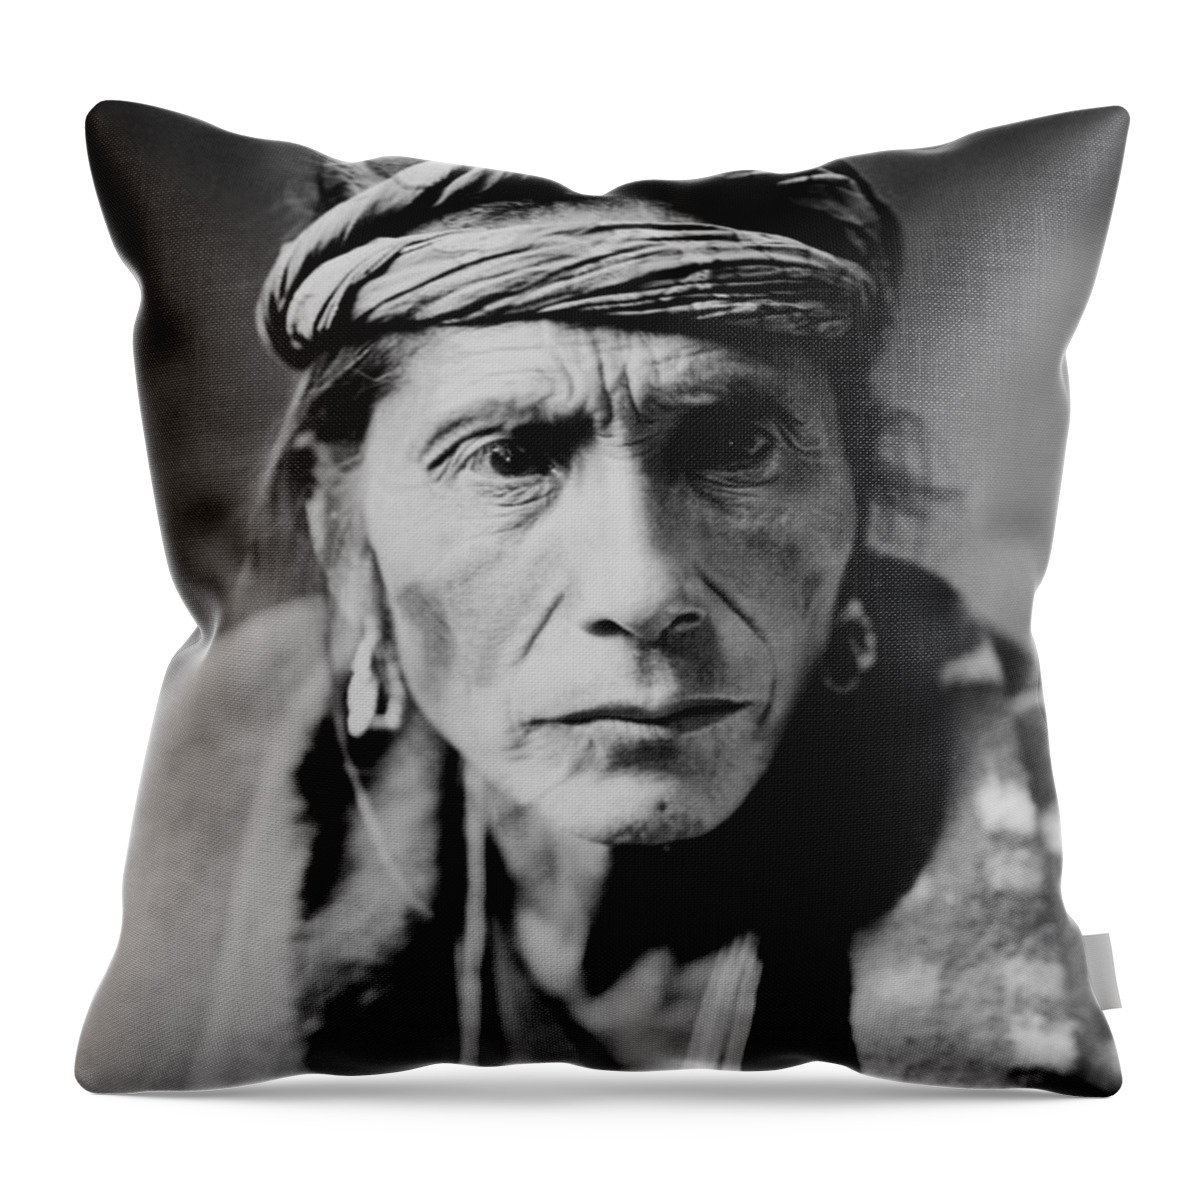 1905 Throw Pillow featuring the photograph Navajo man circa 1905 by Aged Pixel